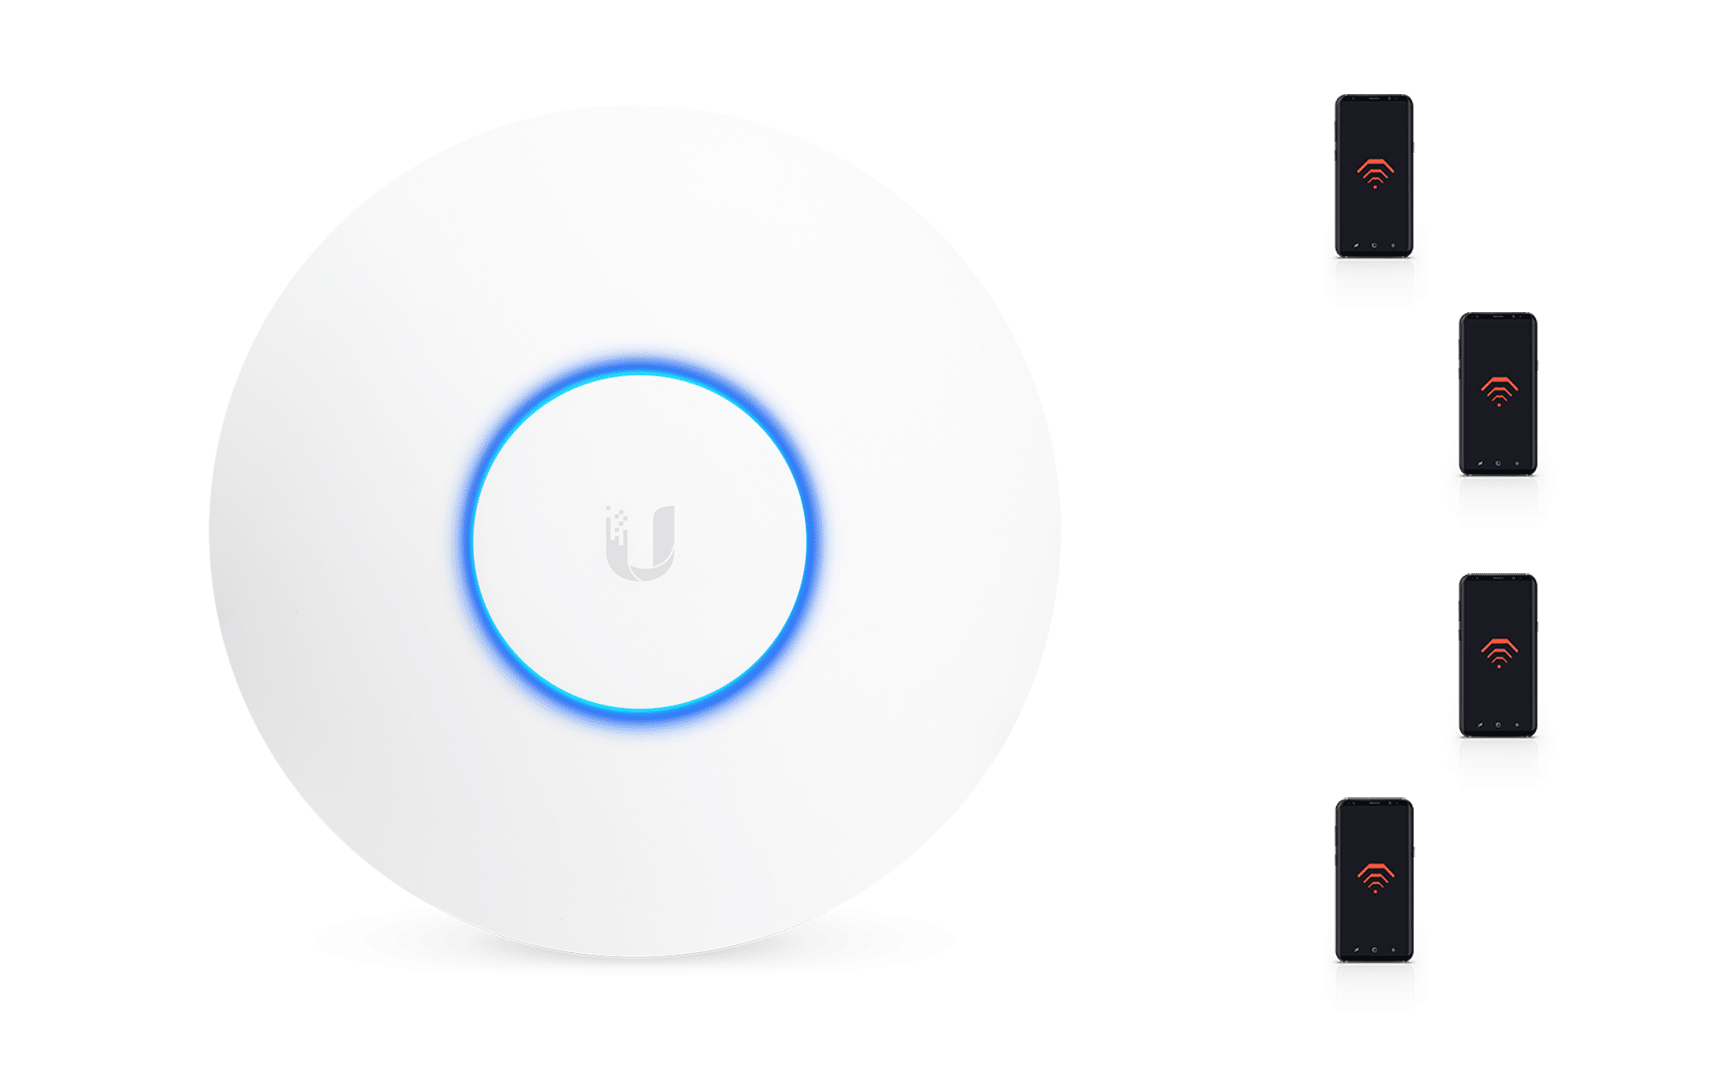 Ubiquiti UniFi Wi-Fi system allows users to build a centrally managed Wi-Fi network